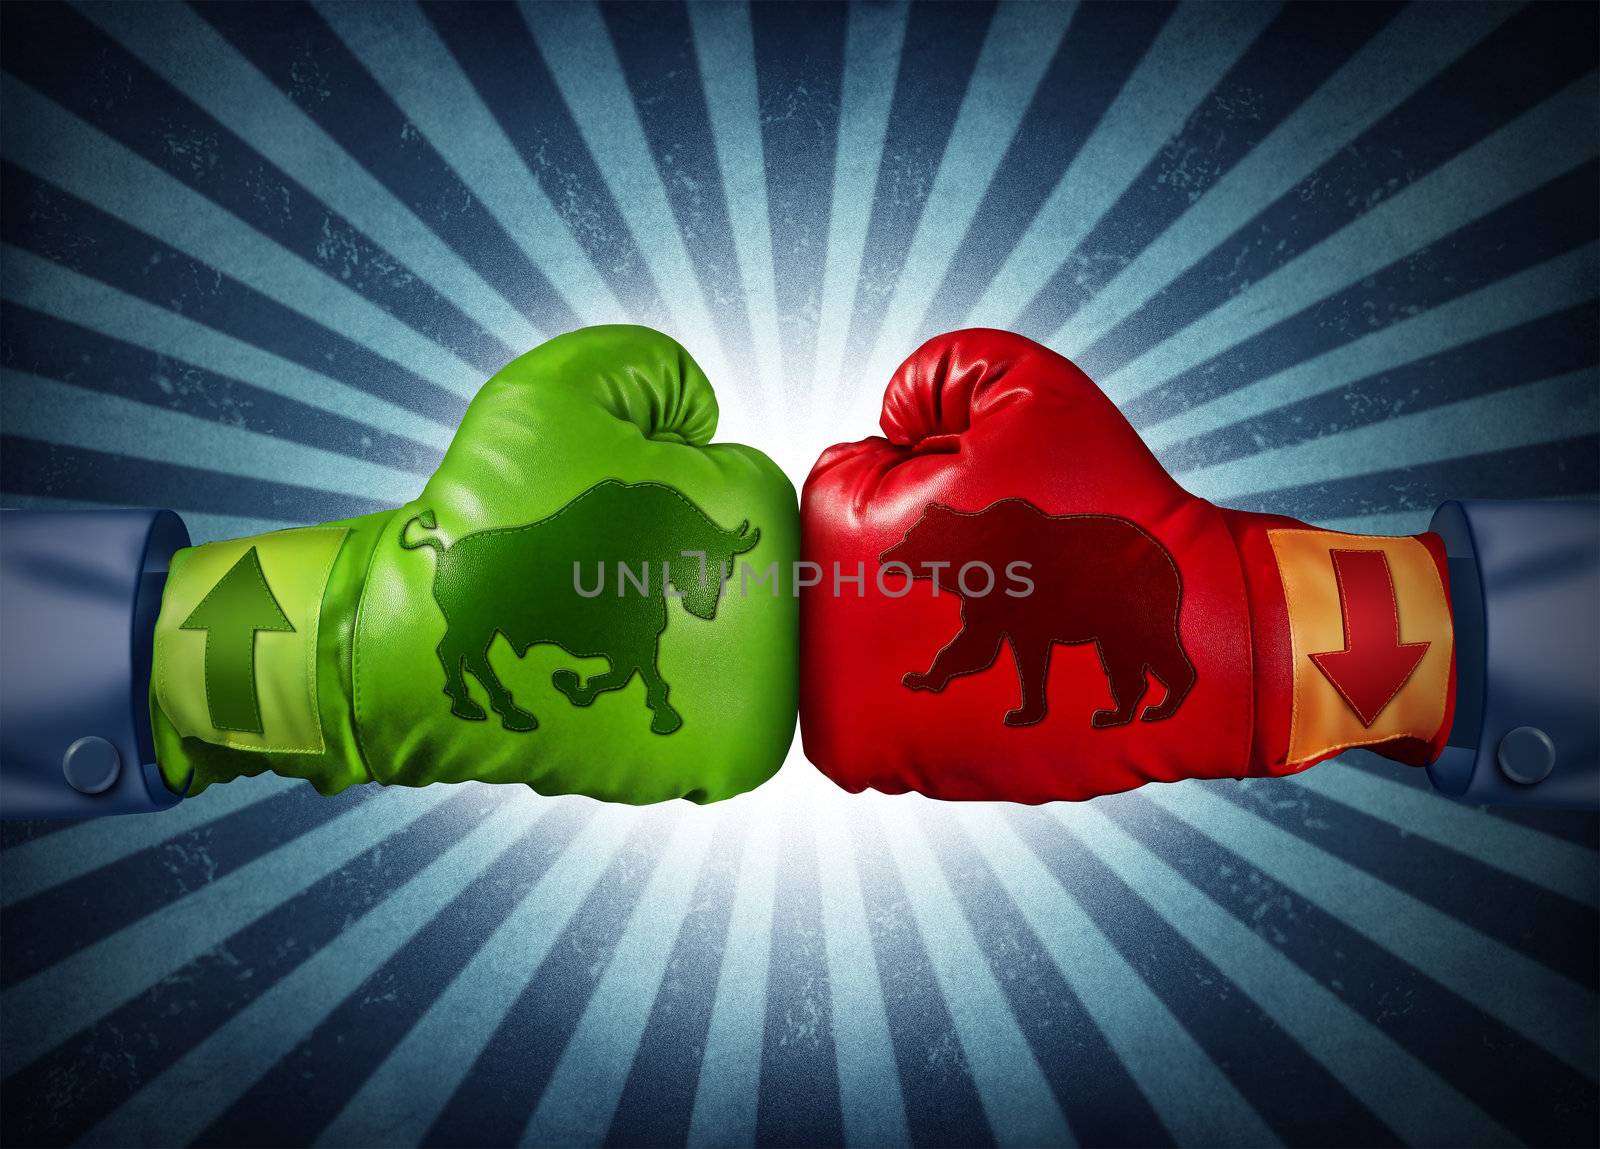 Stock market trading business concept with two boxing gloves with arrows going up and down with bull and bear icon emblems stitched to the glove as investment decisions and financial success with radial background.